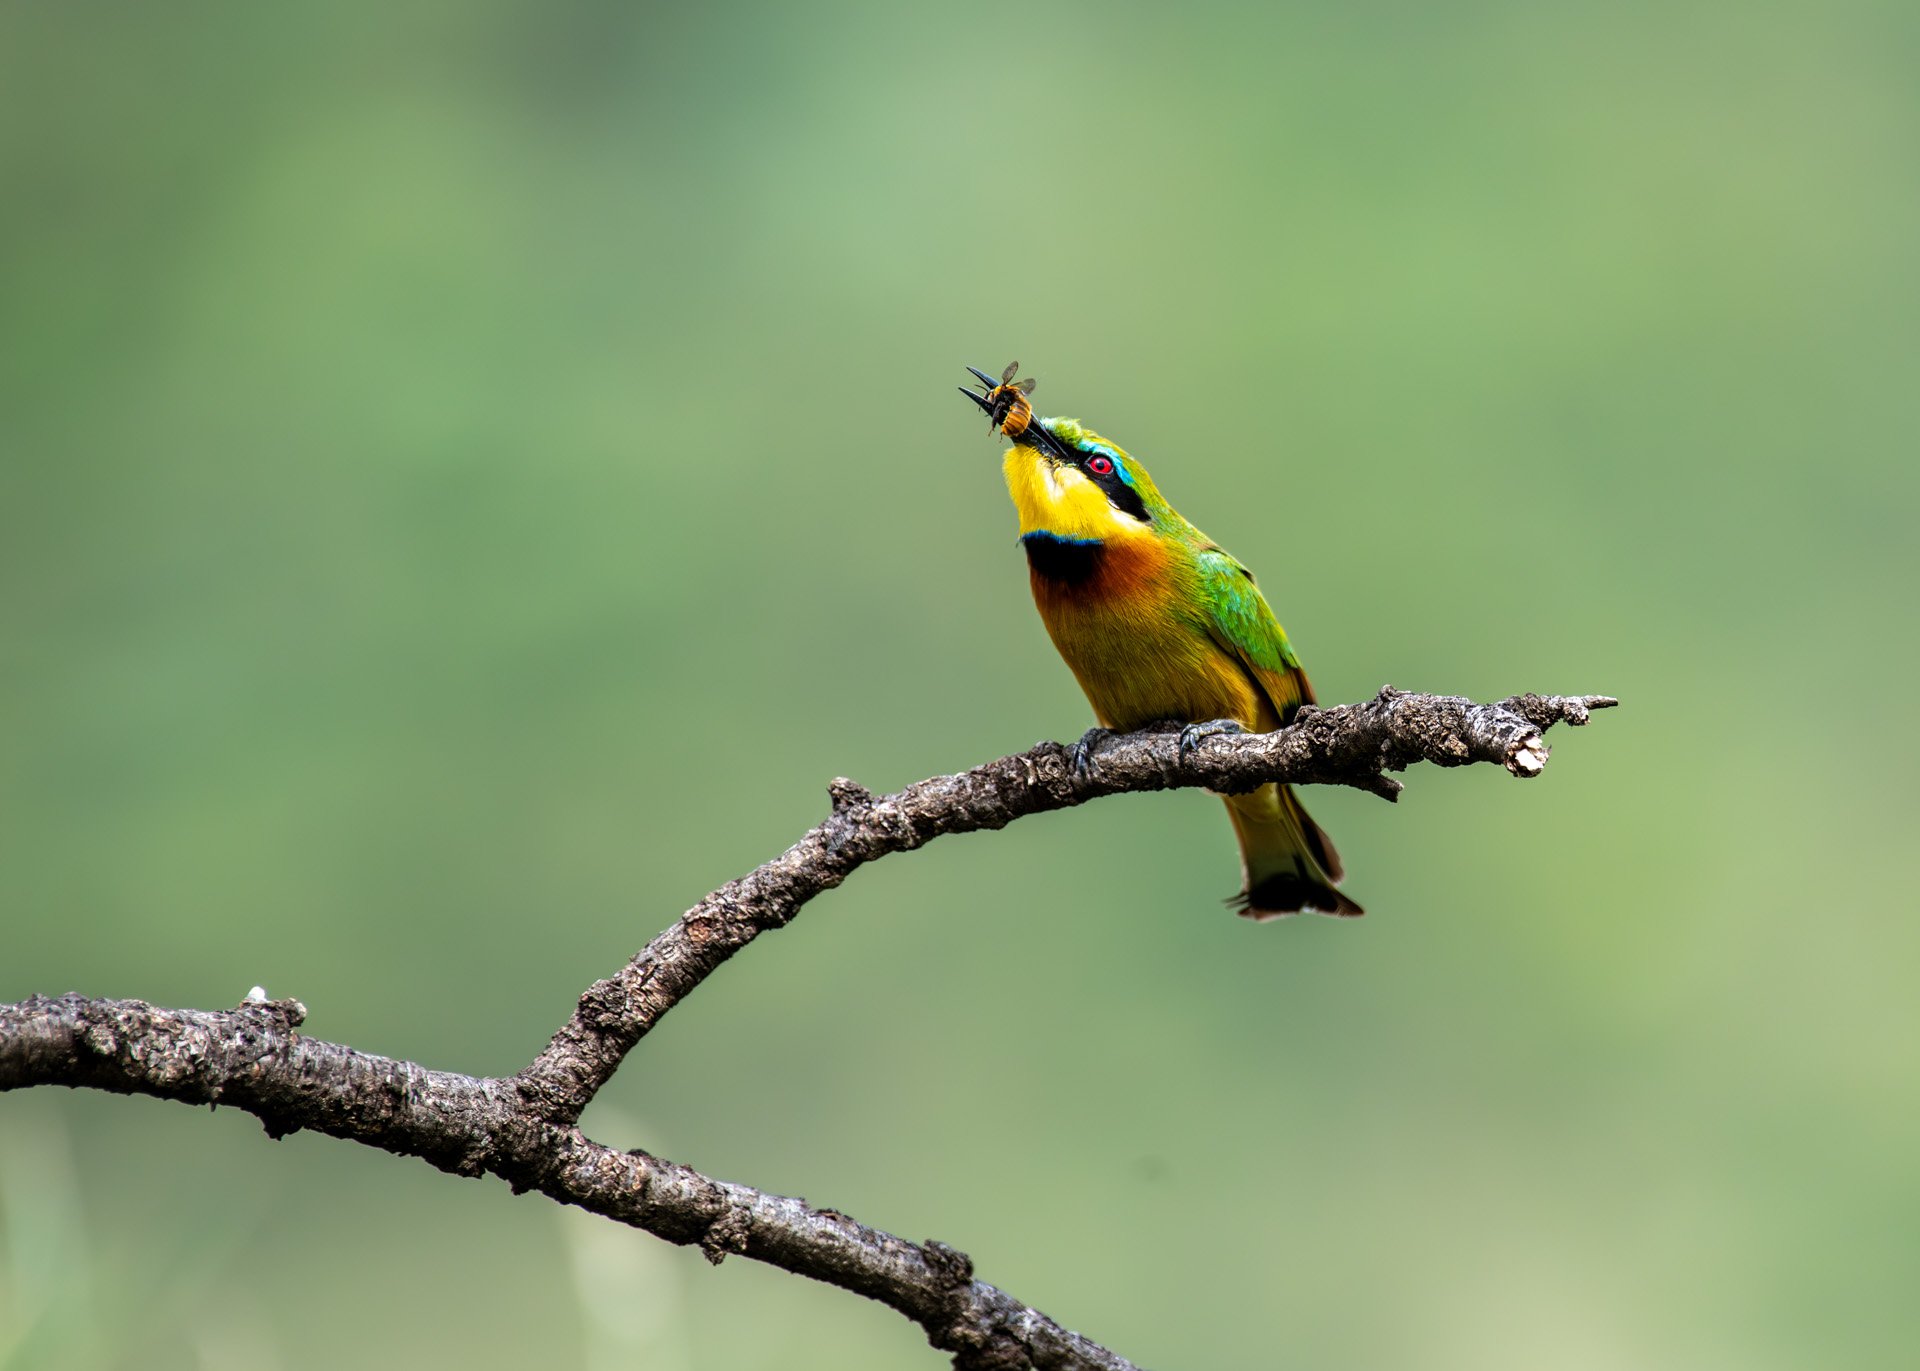 Above: A little bee-eater doing what it does best